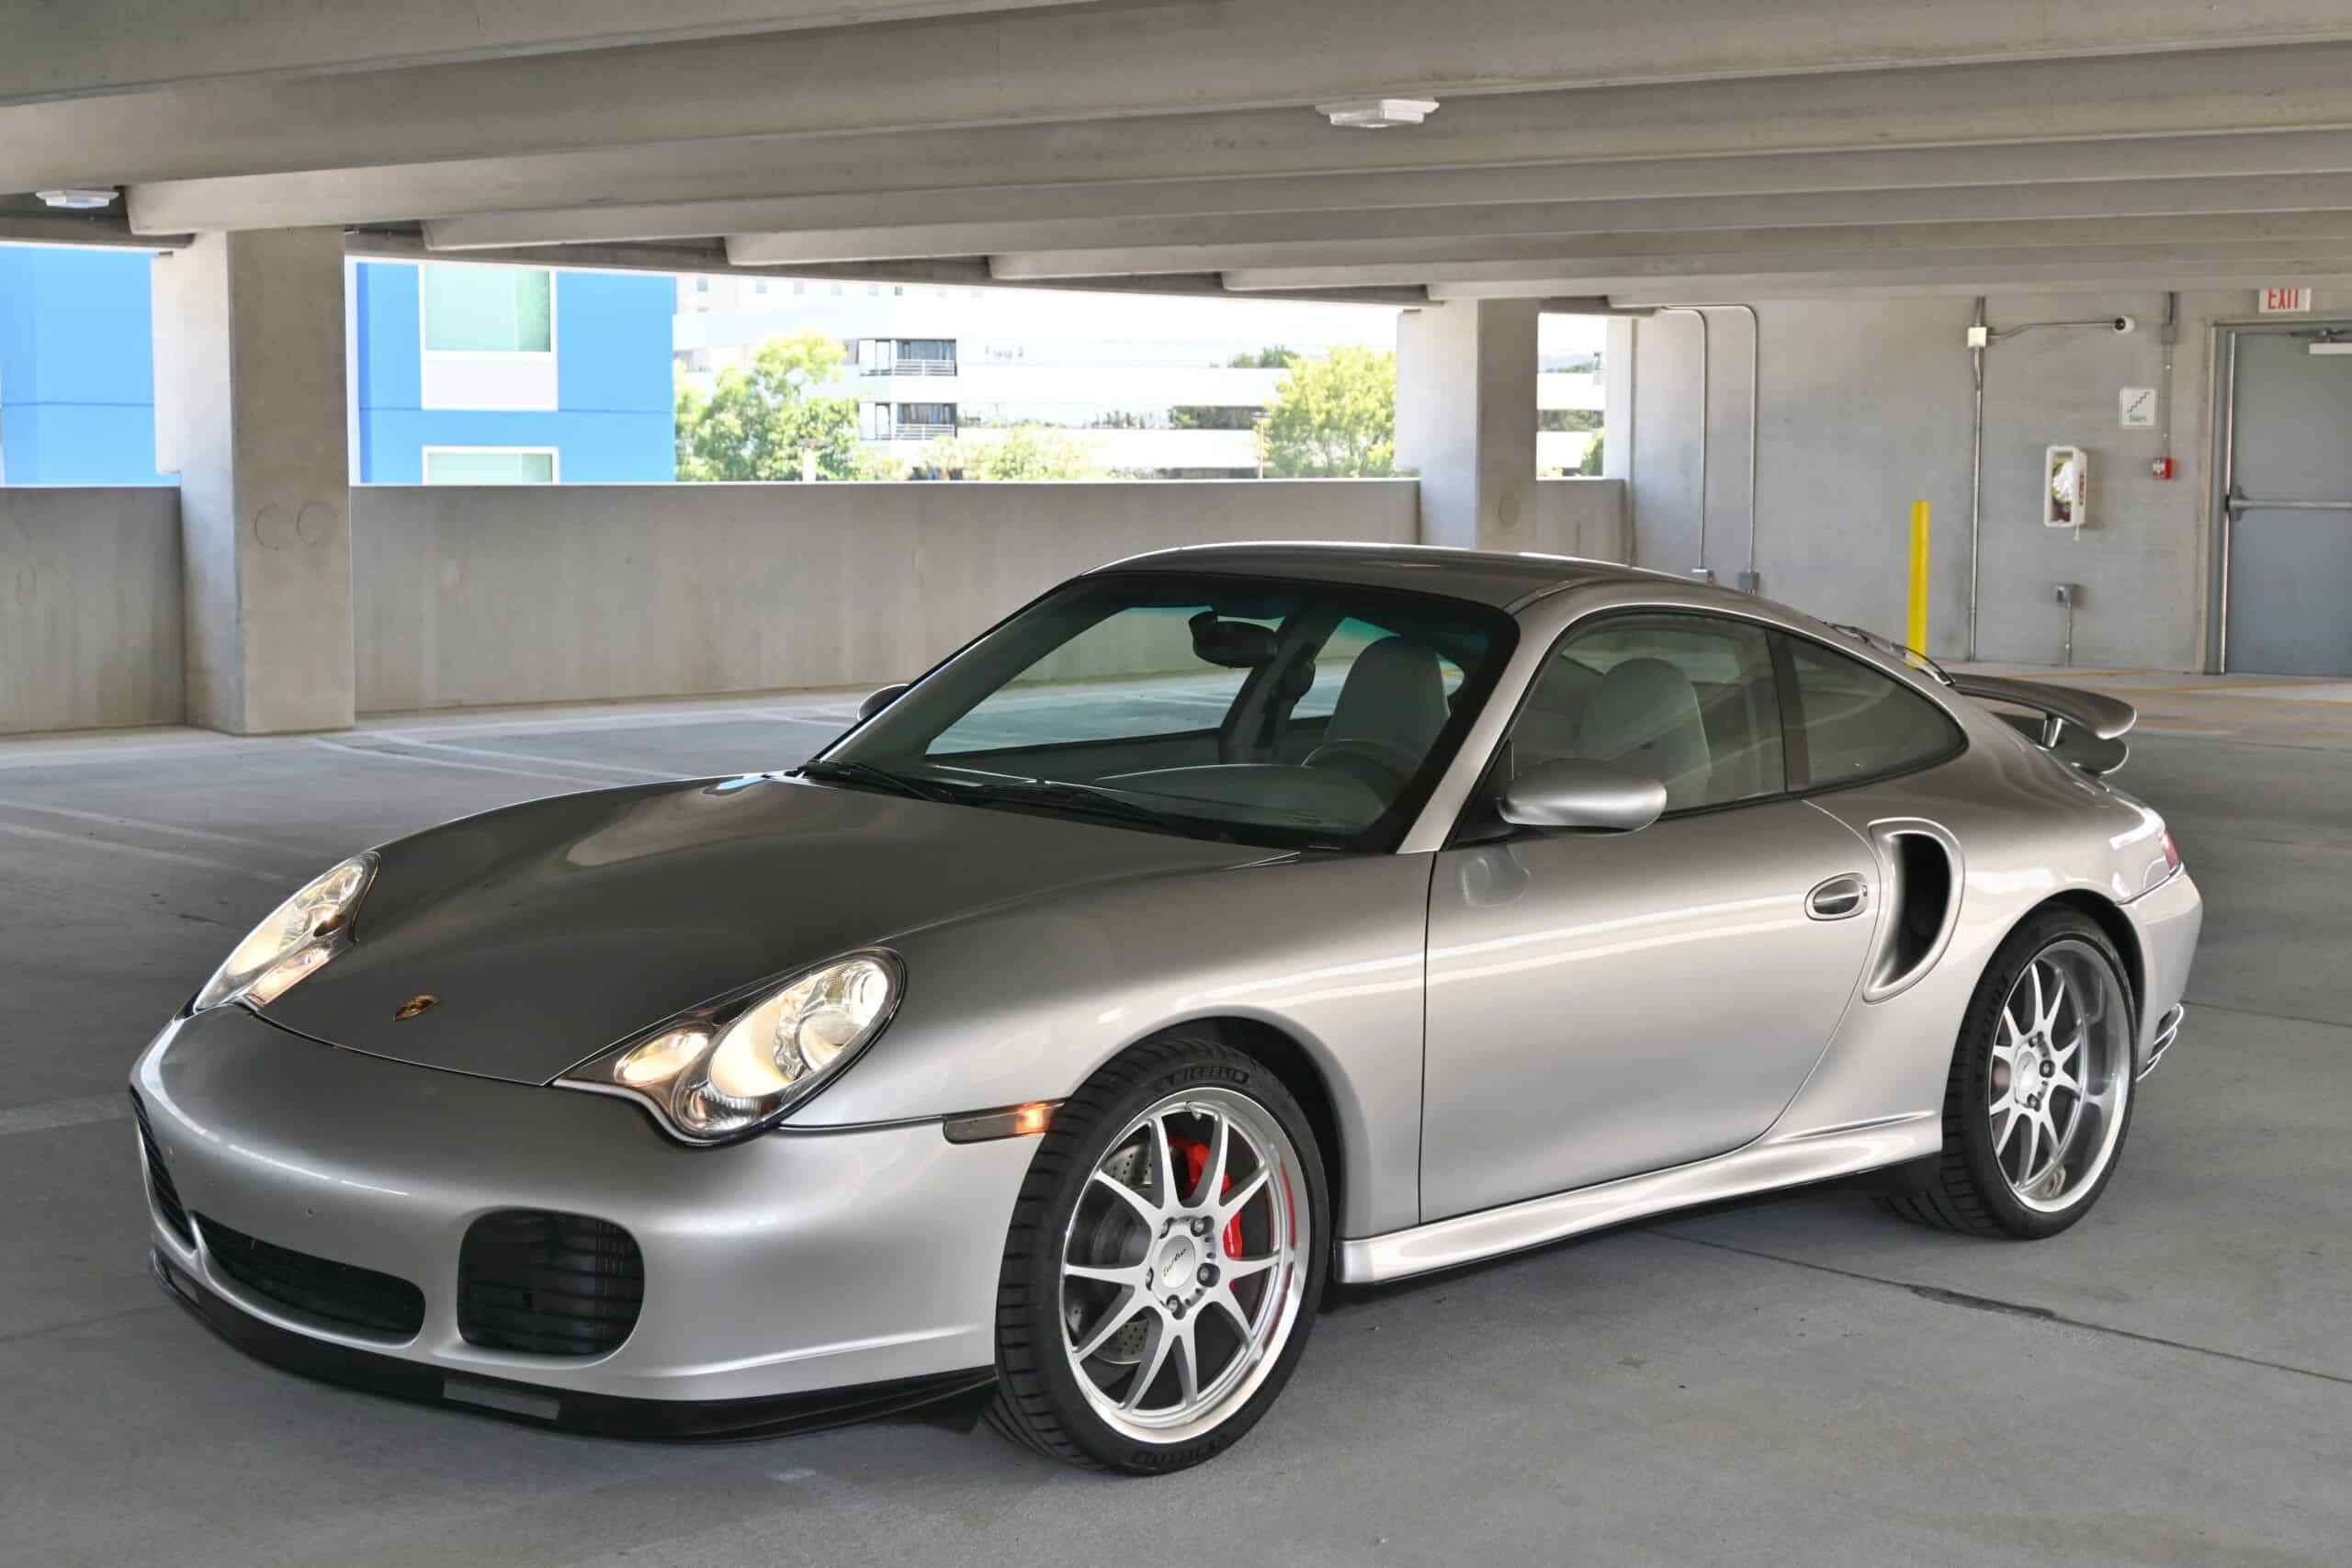 2002 Porsche 911 996 Turbo ONLY 13K Miles / Original paint / Documented service history / 6 speed